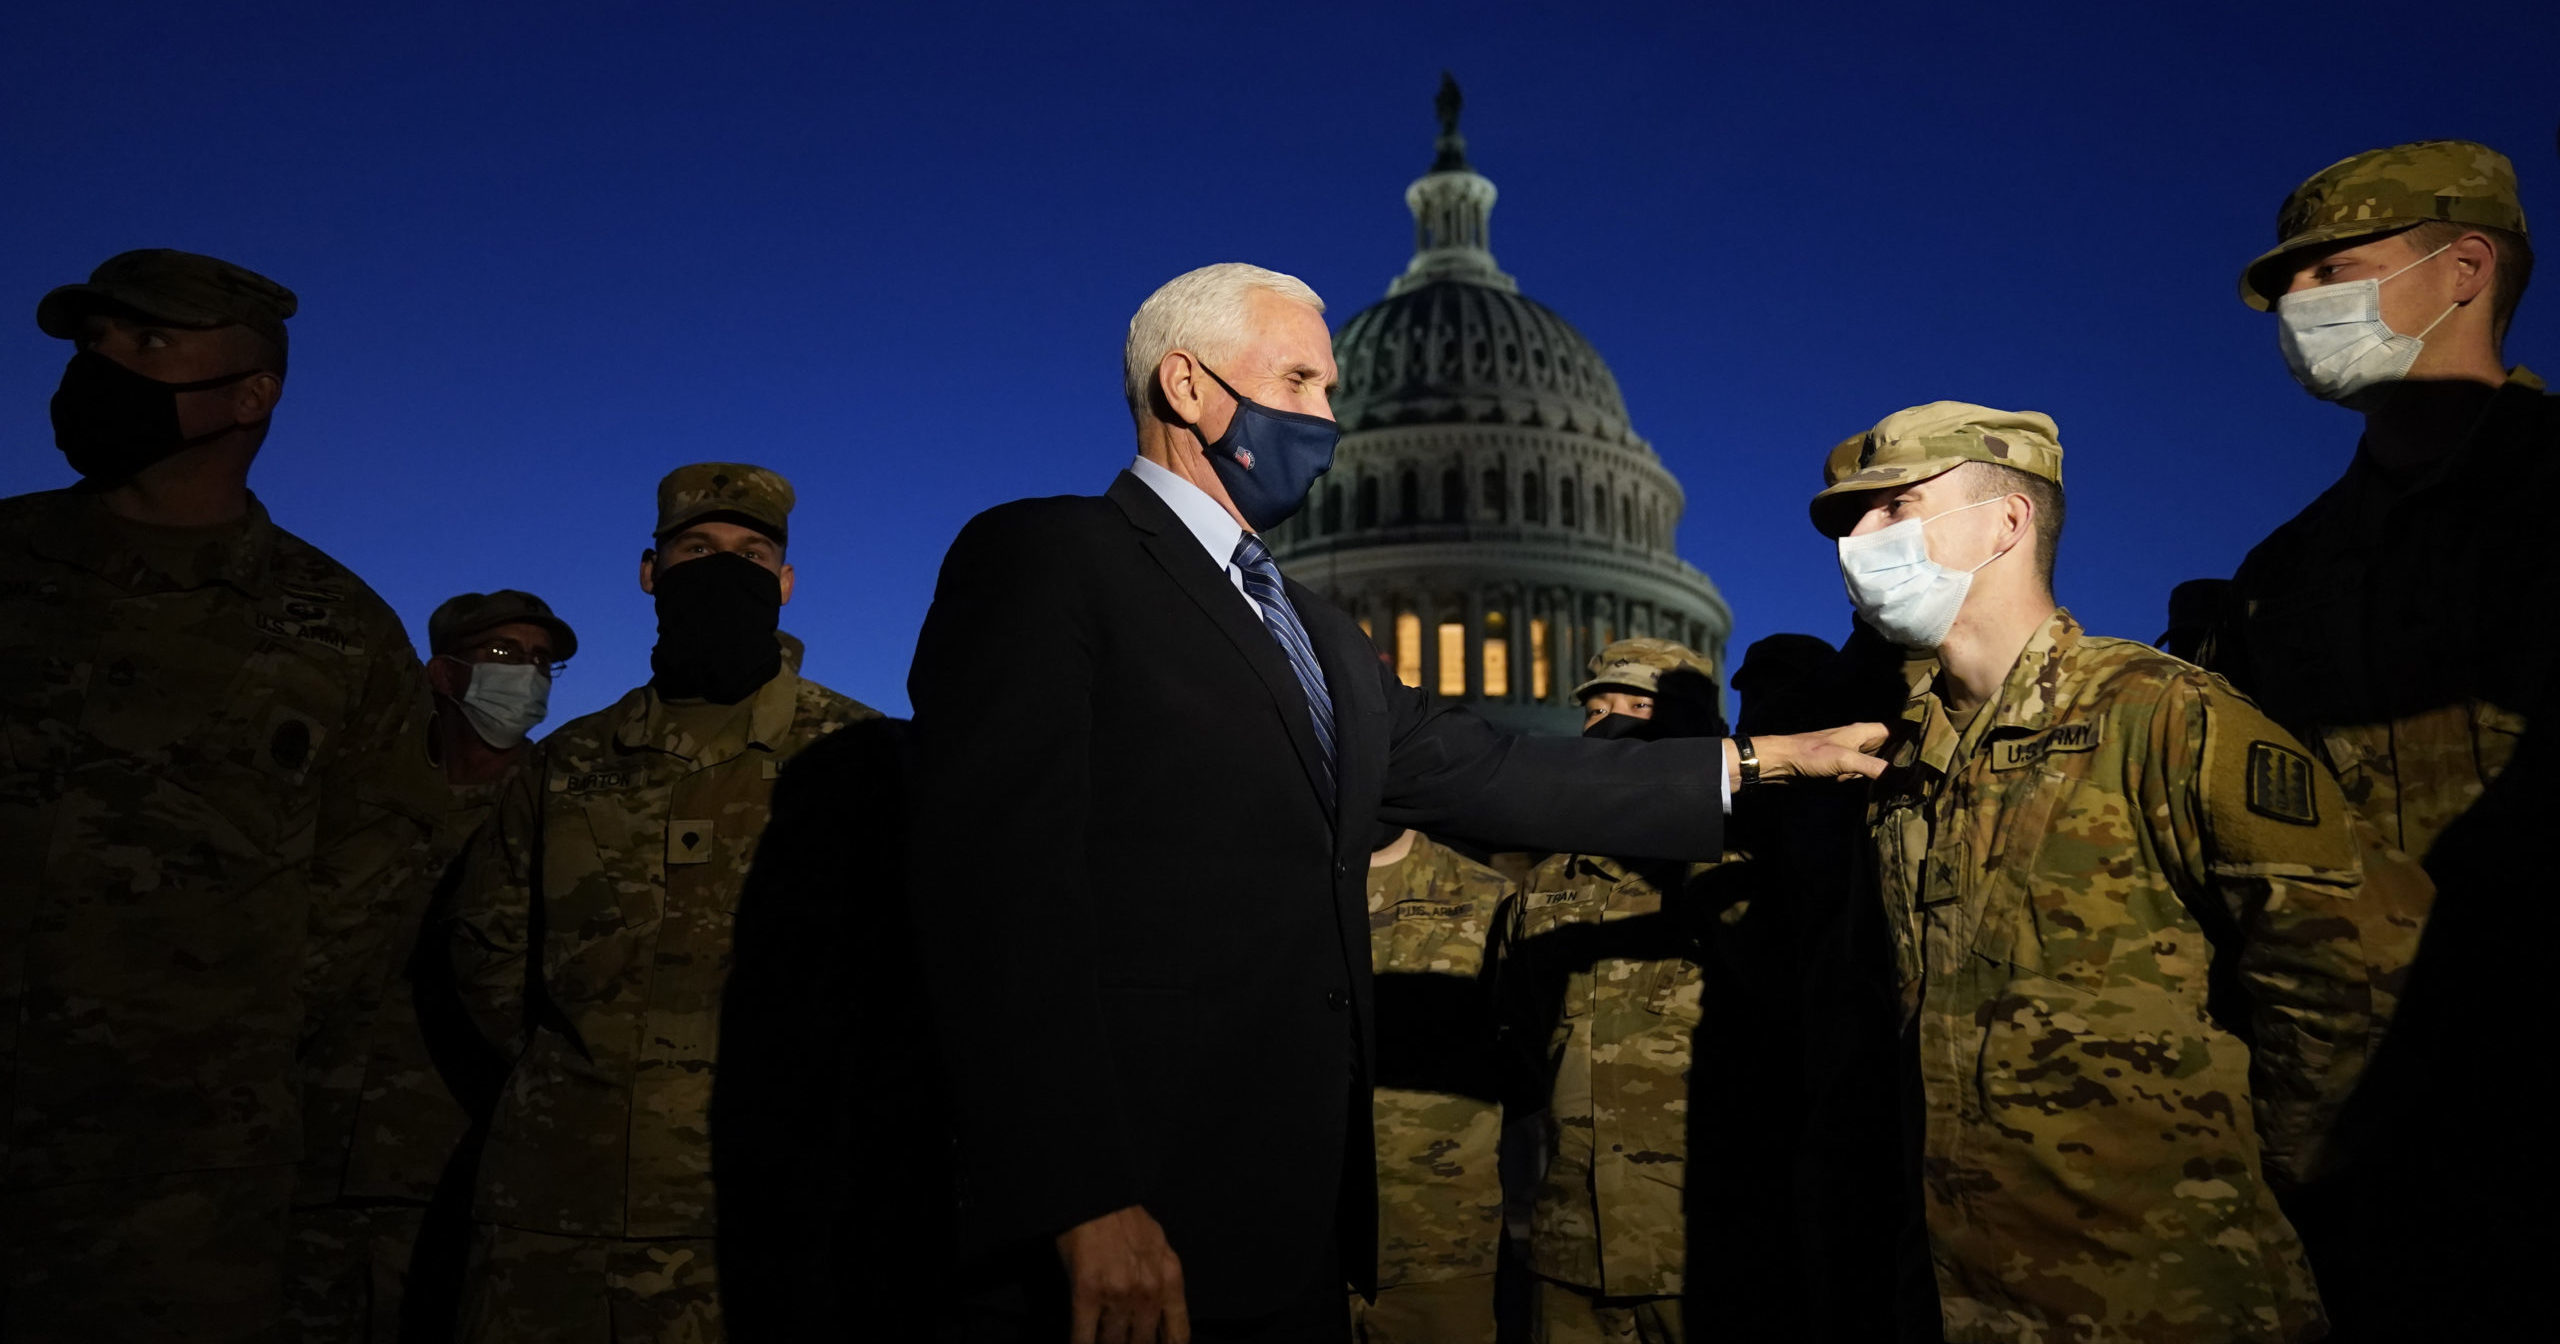 Vice President Mike Pence speaks to National Guard troops outside the U.S. Capitol on Jan. 14, 2021, in Washington, D.C.